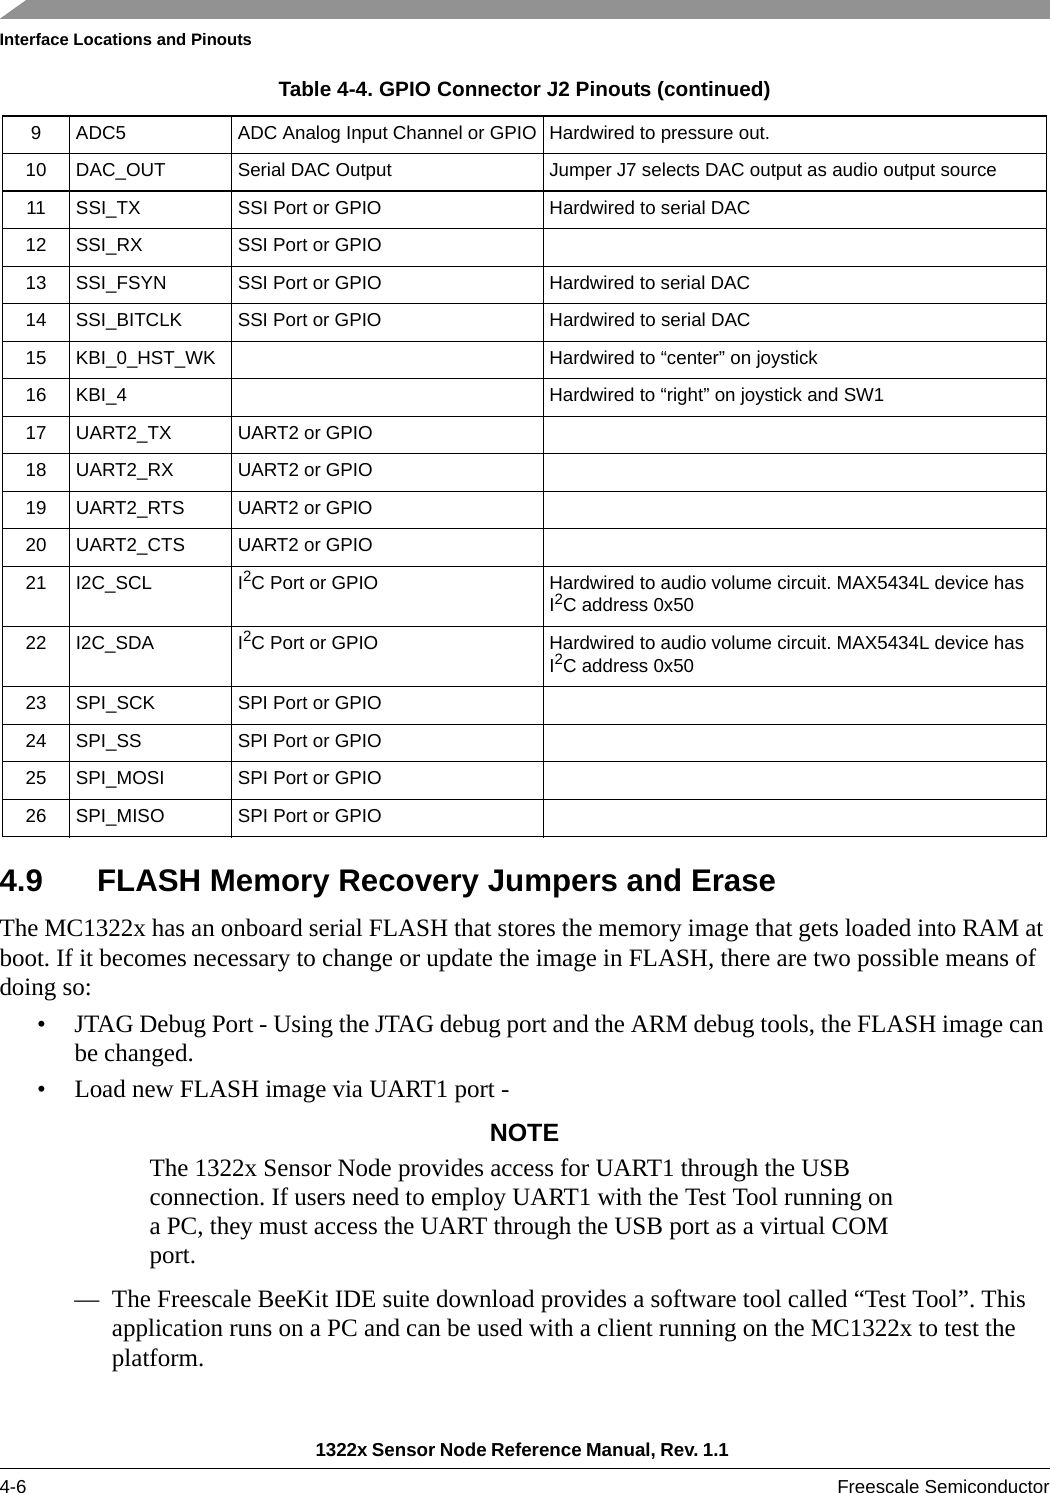 Interface Locations and Pinouts1322x Sensor Node Reference Manual, Rev. 1.1 4-6 Freescale Semiconductor4.9 FLASH Memory Recovery Jumpers and EraseThe MC1322x has an onboard serial FLASH that stores the memory image that gets loaded into RAM at boot. If it becomes necessary to change or update the image in FLASH, there are two possible means of doing so:• JTAG Debug Port - Using the JTAG debug port and the ARM debug tools, the FLASH image can be changed.• Load new FLASH image via UART1 port -NOTEThe 1322x Sensor Node provides access for UART1 through the USB connection. If users need to employ UART1 with the Test Tool running on a PC, they must access the UART through the USB port as a virtual COM port.— The Freescale BeeKit IDE suite download provides a software tool called “Test Tool”. This application runs on a PC and can be used with a client running on the MC1322x to test the platform.9 ADC5 ADC Analog Input Channel or GPIO Hardwired to pressure out.10 DAC_OUT Serial DAC Output Jumper J7 selects DAC output as audio output source11 SSI_TX SSI Port or GPIO Hardwired to serial DAC12 SSI_RX SSI Port or GPIO13 SSI_FSYN SSI Port or GPIO Hardwired to serial DAC14 SSI_BITCLK SSI Port or GPIO Hardwired to serial DAC15 KBI_0_HST_WK Hardwired to “center” on joystick16 KBI_4 Hardwired to “right” on joystick and SW117 UART2_TX UART2 or GPIO18 UART2_RX UART2 or GPIO19 UART2_RTS UART2 or GPIO20 UART2_CTS UART2 or GPIO21 I2C_SCL I2C Port or GPIO Hardwired to audio volume circuit. MAX5434L device has I2C address 0x5022 I2C_SDA I2C Port or GPIO Hardwired to audio volume circuit. MAX5434L device has I2C address 0x5023 SPI_SCK SPI Port or GPIO24 SPI_SS SPI Port or GPIO25 SPI_MOSI SPI Port or GPIO26 SPI_MISO SPI Port or GPIOTable 4-4. GPIO Connector J2 Pinouts (continued)